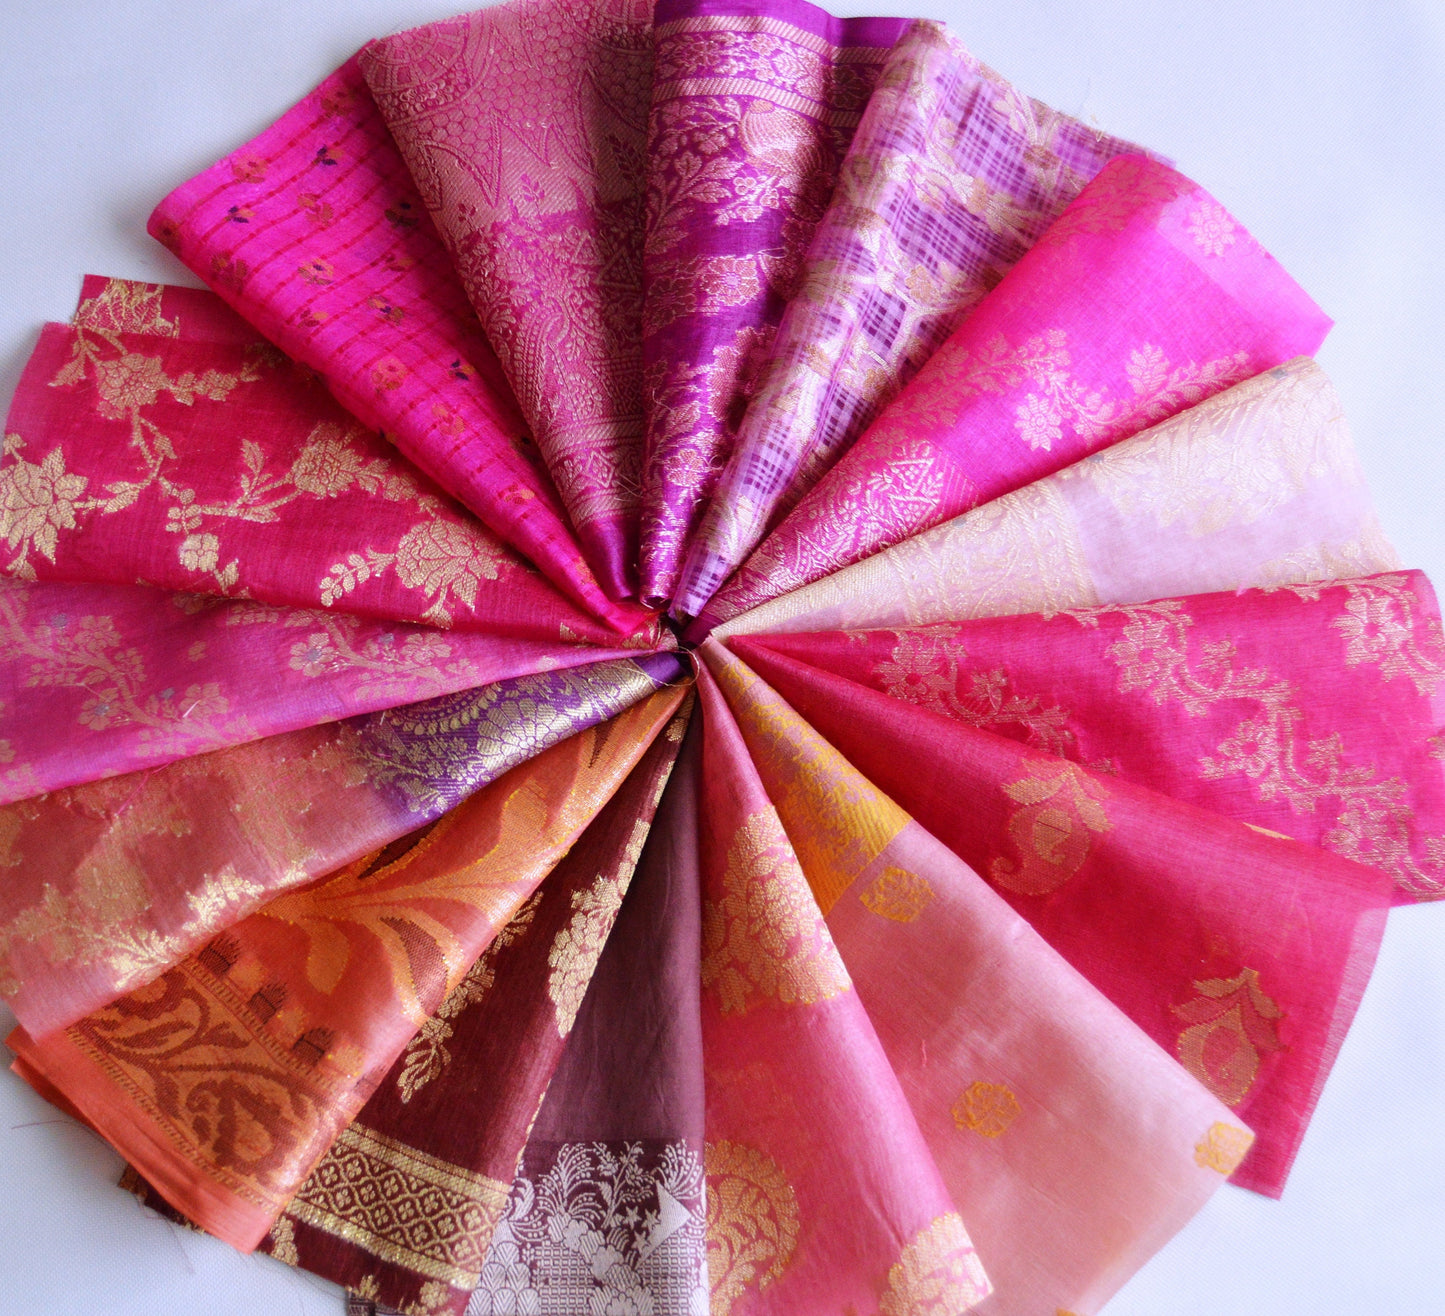 5 Inch x 16 Pieces Pink Recycled Vintage Silk Sari Scraps Brocade Fabric Card Making Collage Mixed Media Textile Art Junk Journals